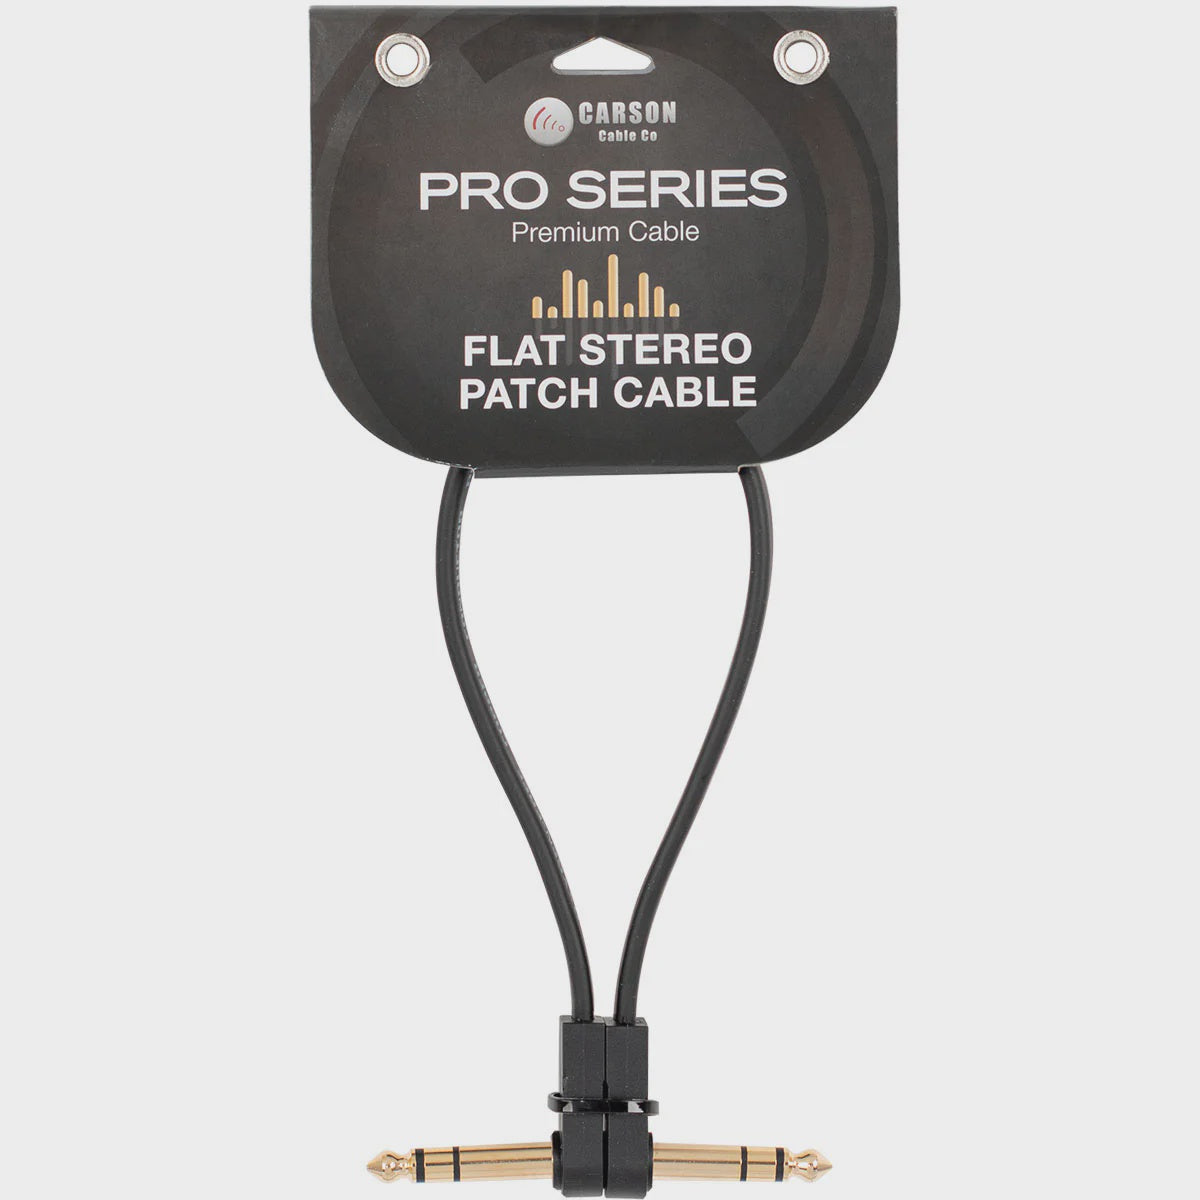 Carson 'Pro Series' 1 FT Patch Cable